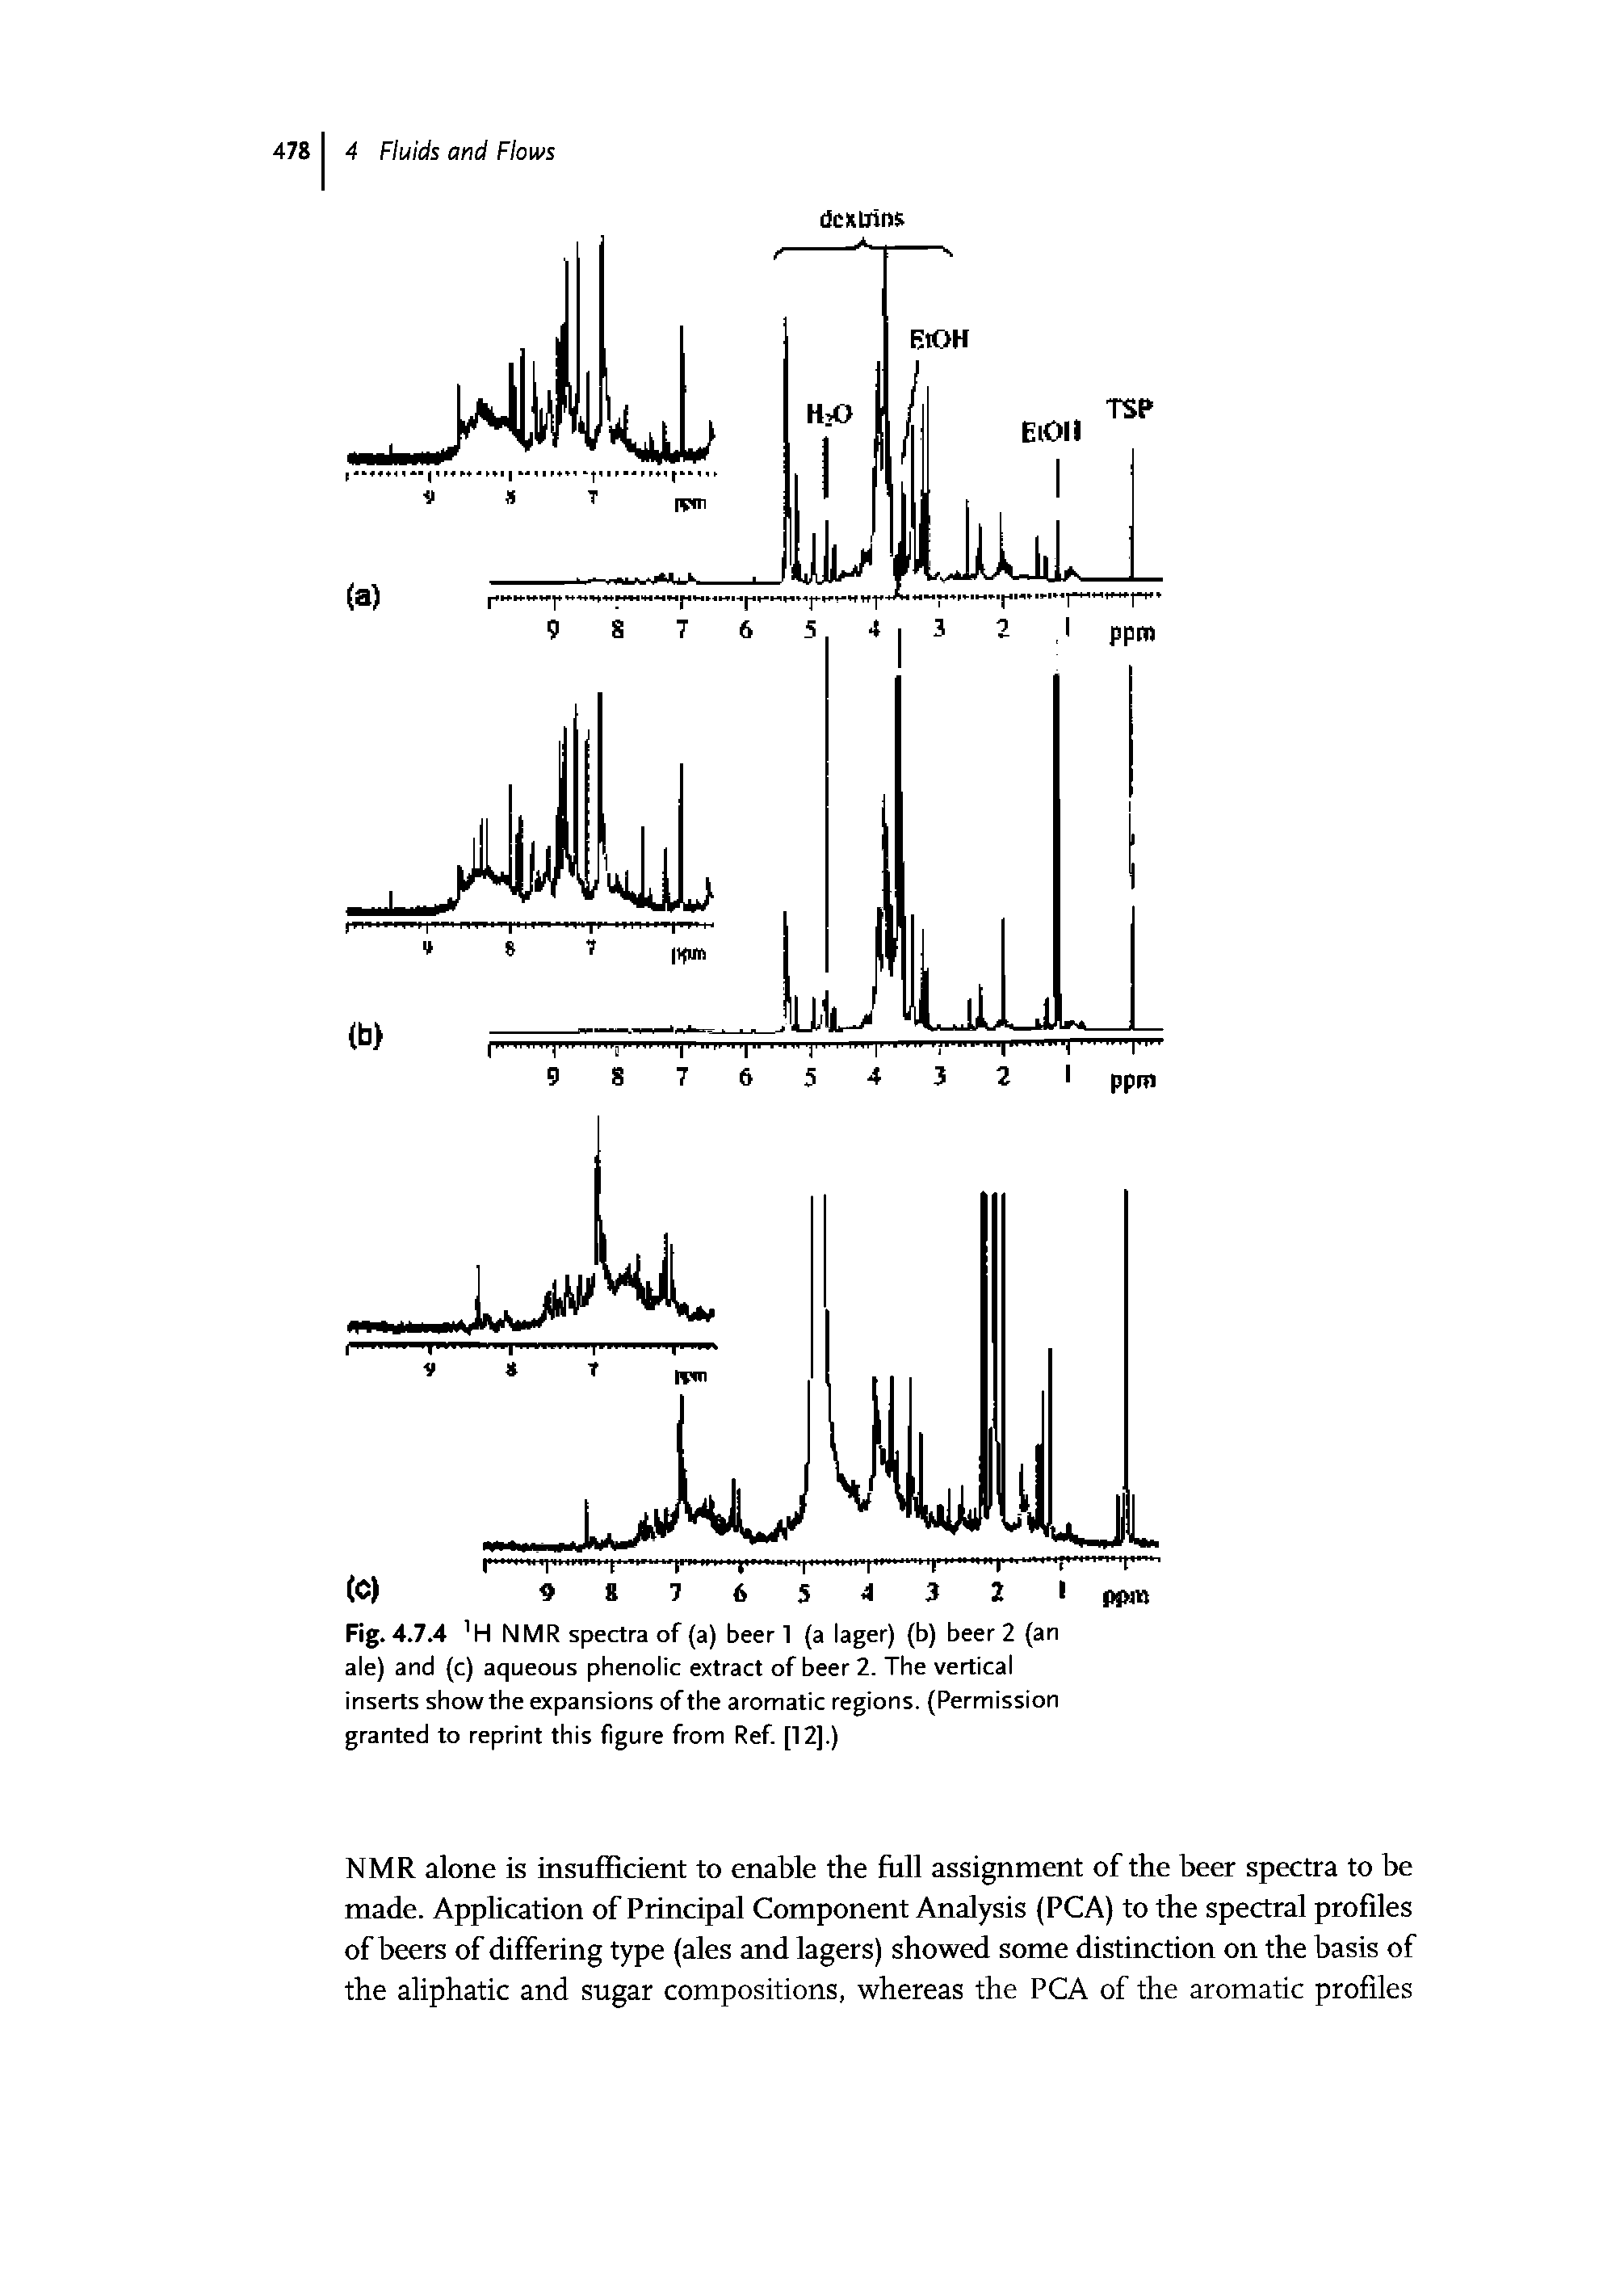 Fig. 4.7.4 H NMR spectra of (a) beer 1 (a lager) (b) beer 2 (an ale) and (c) aqueous phenolic extract of beer 2. The vertical inserts show the expansions of the aromatic regions. (Permission granted to reprint this figure from Ref. [12].)...